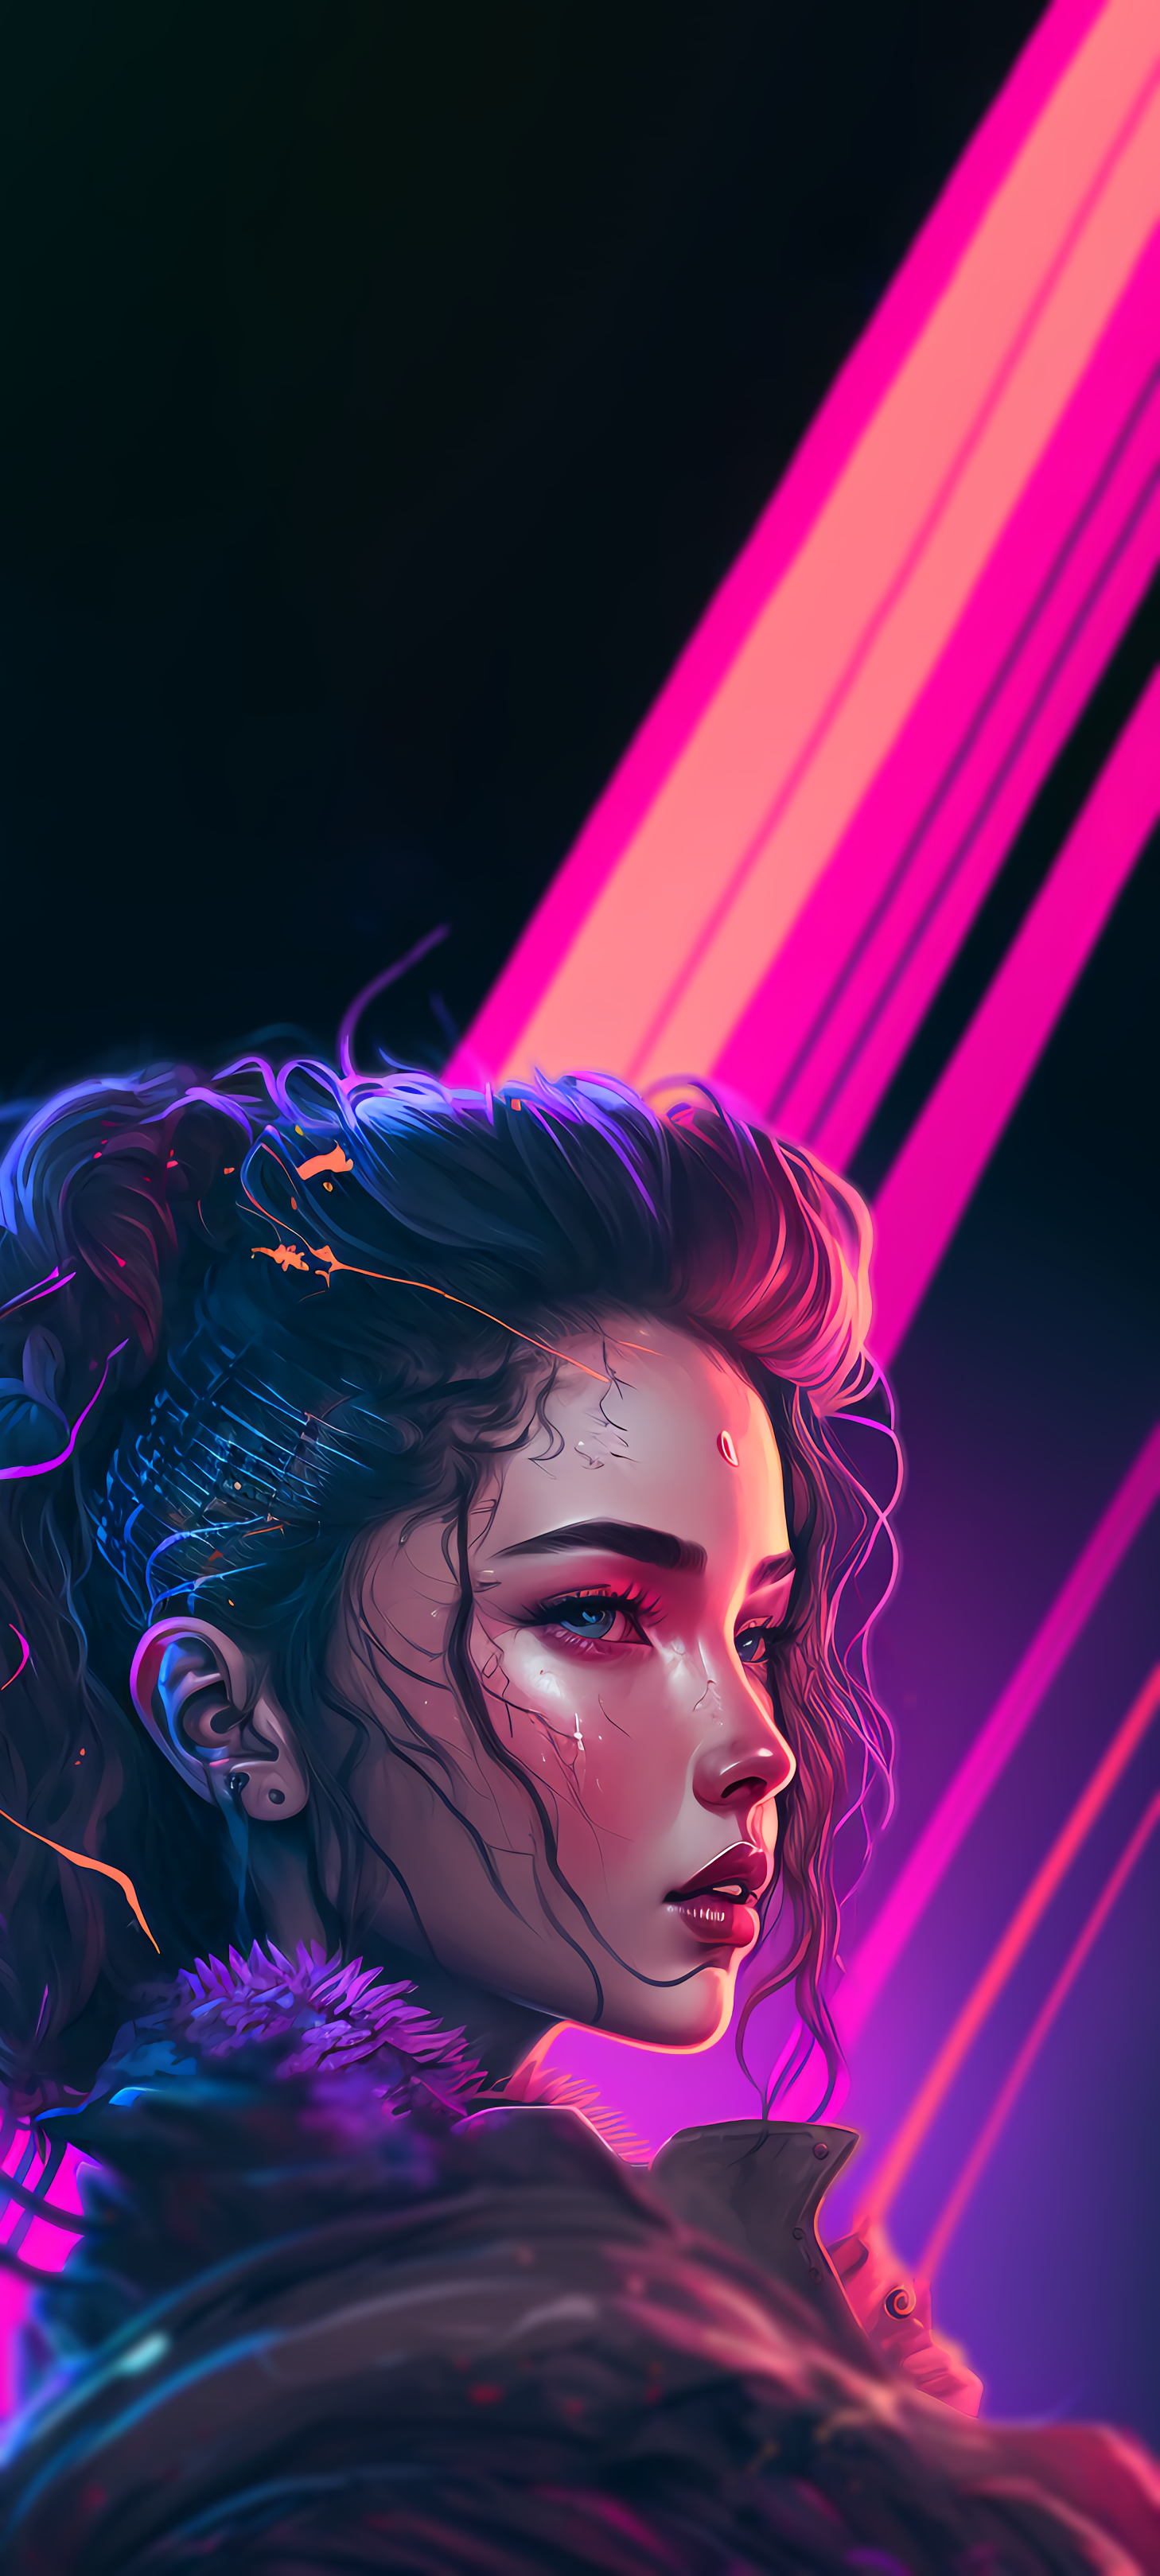 Futuristic Aesthetic Style Girl Portrait Wallpaper for Your Phone